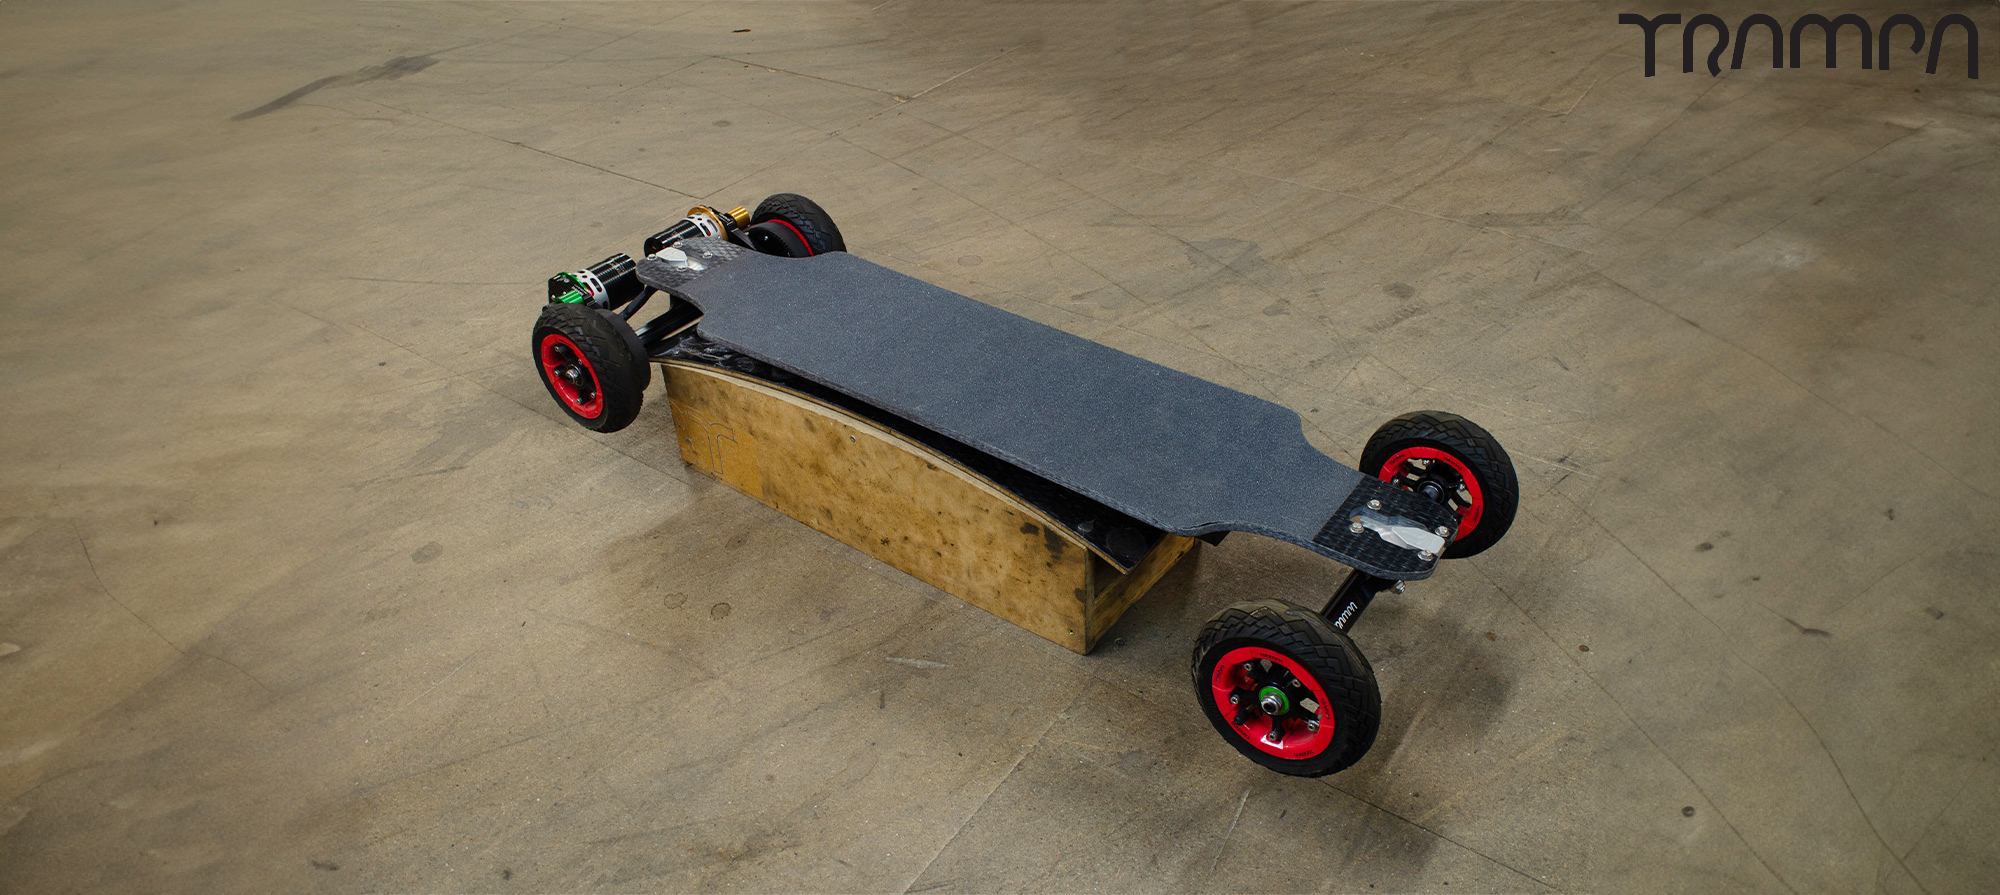 ELB 9 14ply ORRSOM Board with Ubran wheels & 154kv motors. Can fit 12s3p easily